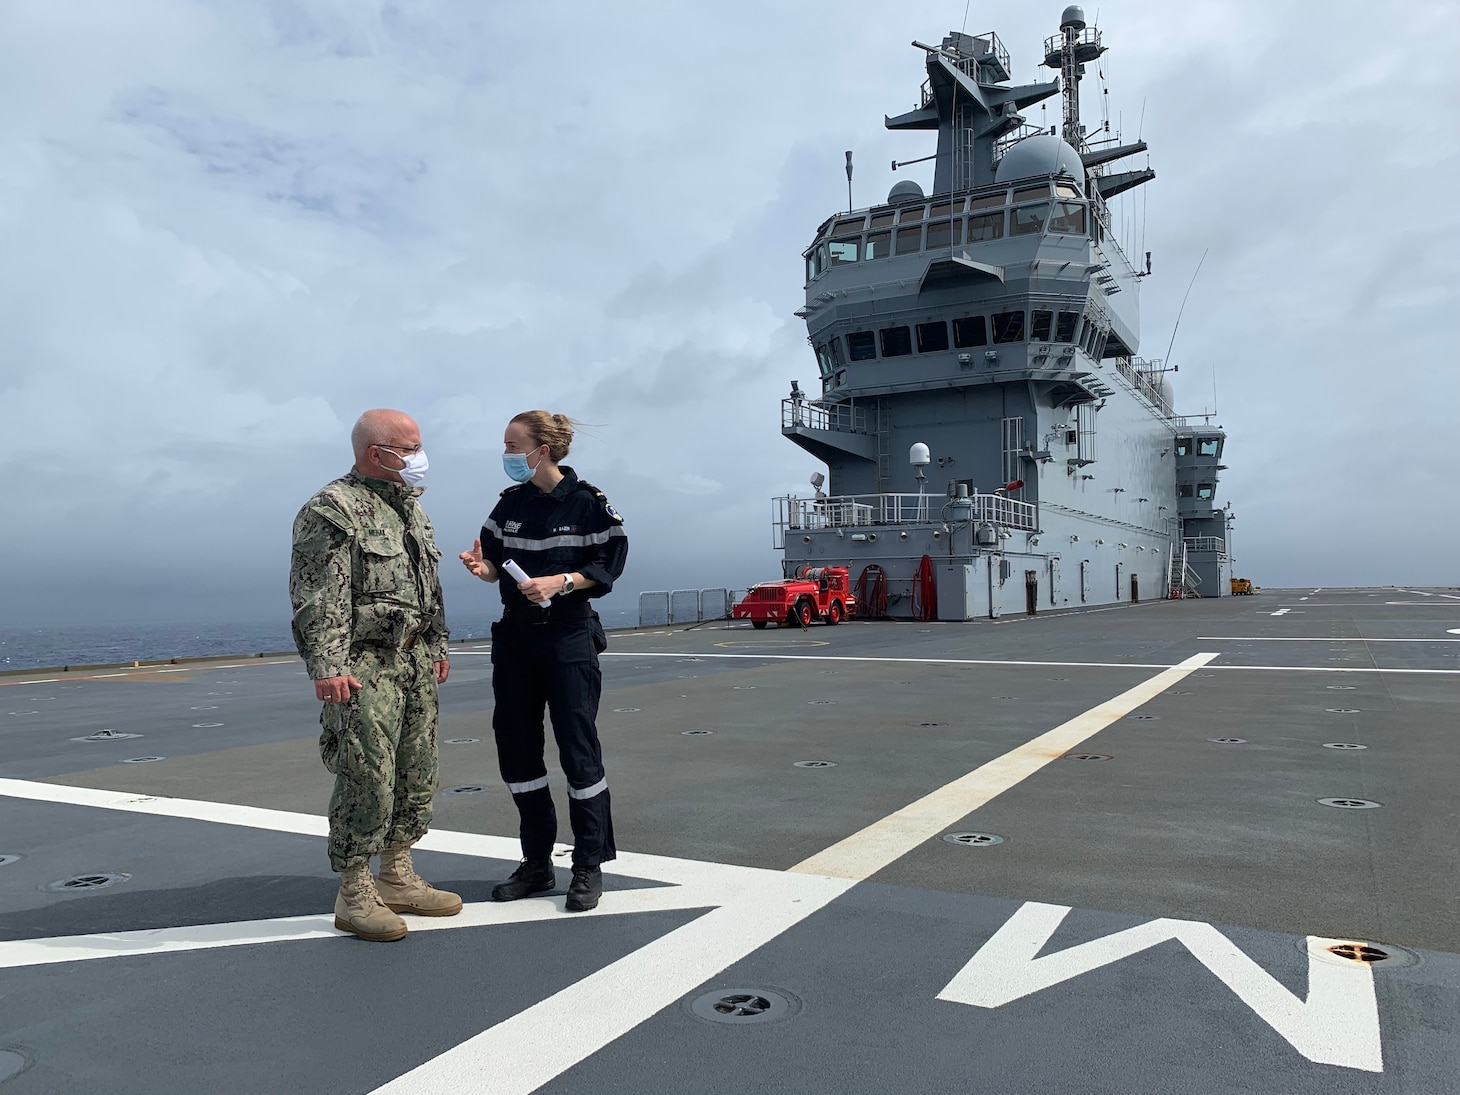 Ensign Hélène Bazin gives a tour of FS Tonnerre (L9014) to U.S. 7th Fleet's Enforcement Coordination Cell (ECC) director, Capt. James J. Mehail. “It was a great opportunity to meet the ECC Director, and give a face to this multinational operation we are participating in," said Bazin. "Moreover, it has a huge benefit for all our midships to plunge into the reality of maritime operations." As the U.S. Navy's largest forward-deployed fleet, 7th Fleet employs 50-70 ships and submarines across the Western Pacific and Indian oceans. U.S. 7th Fleet routinely operates and interacts with 35 maritime nations while conducting missions to preserve and protect a free and open Indo-Pacific Region.